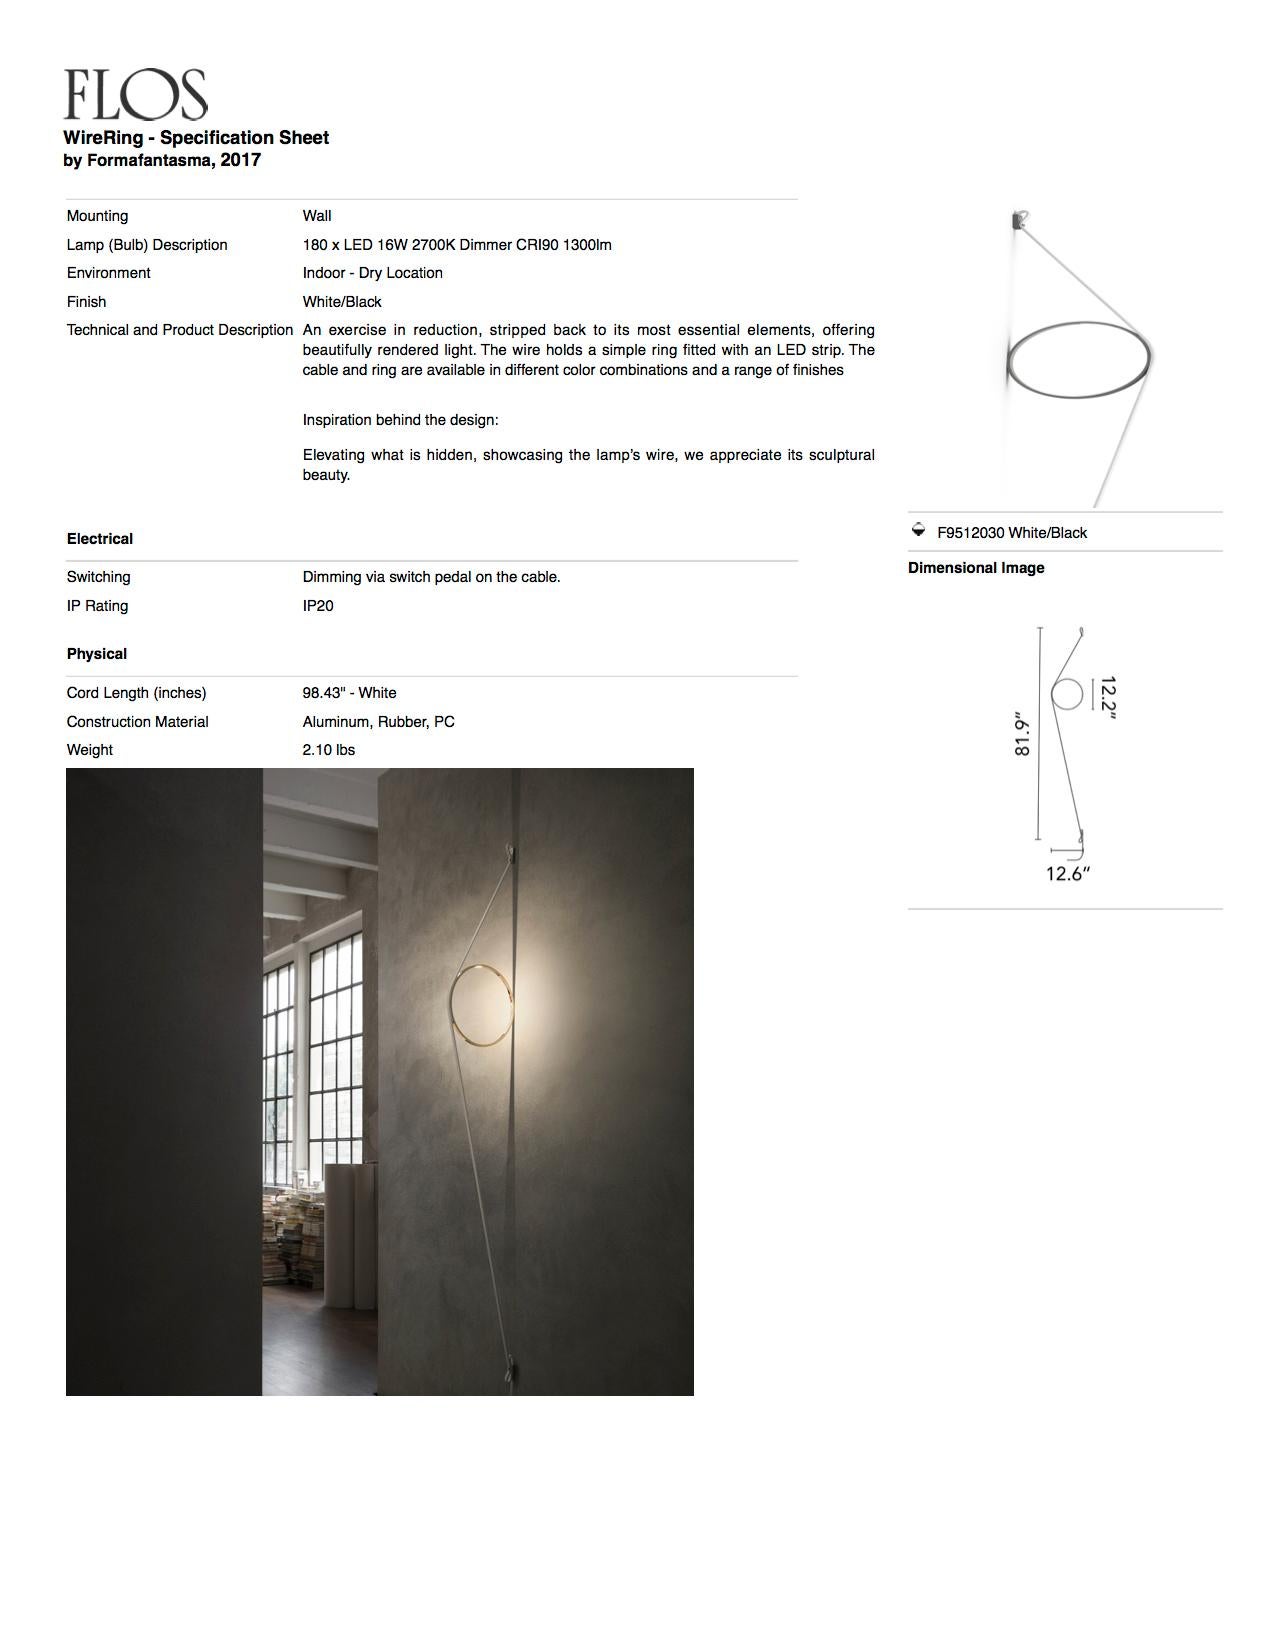 Aluminum FLOS Wirering Wall Light in Grey and White by Formafantasma For Sale